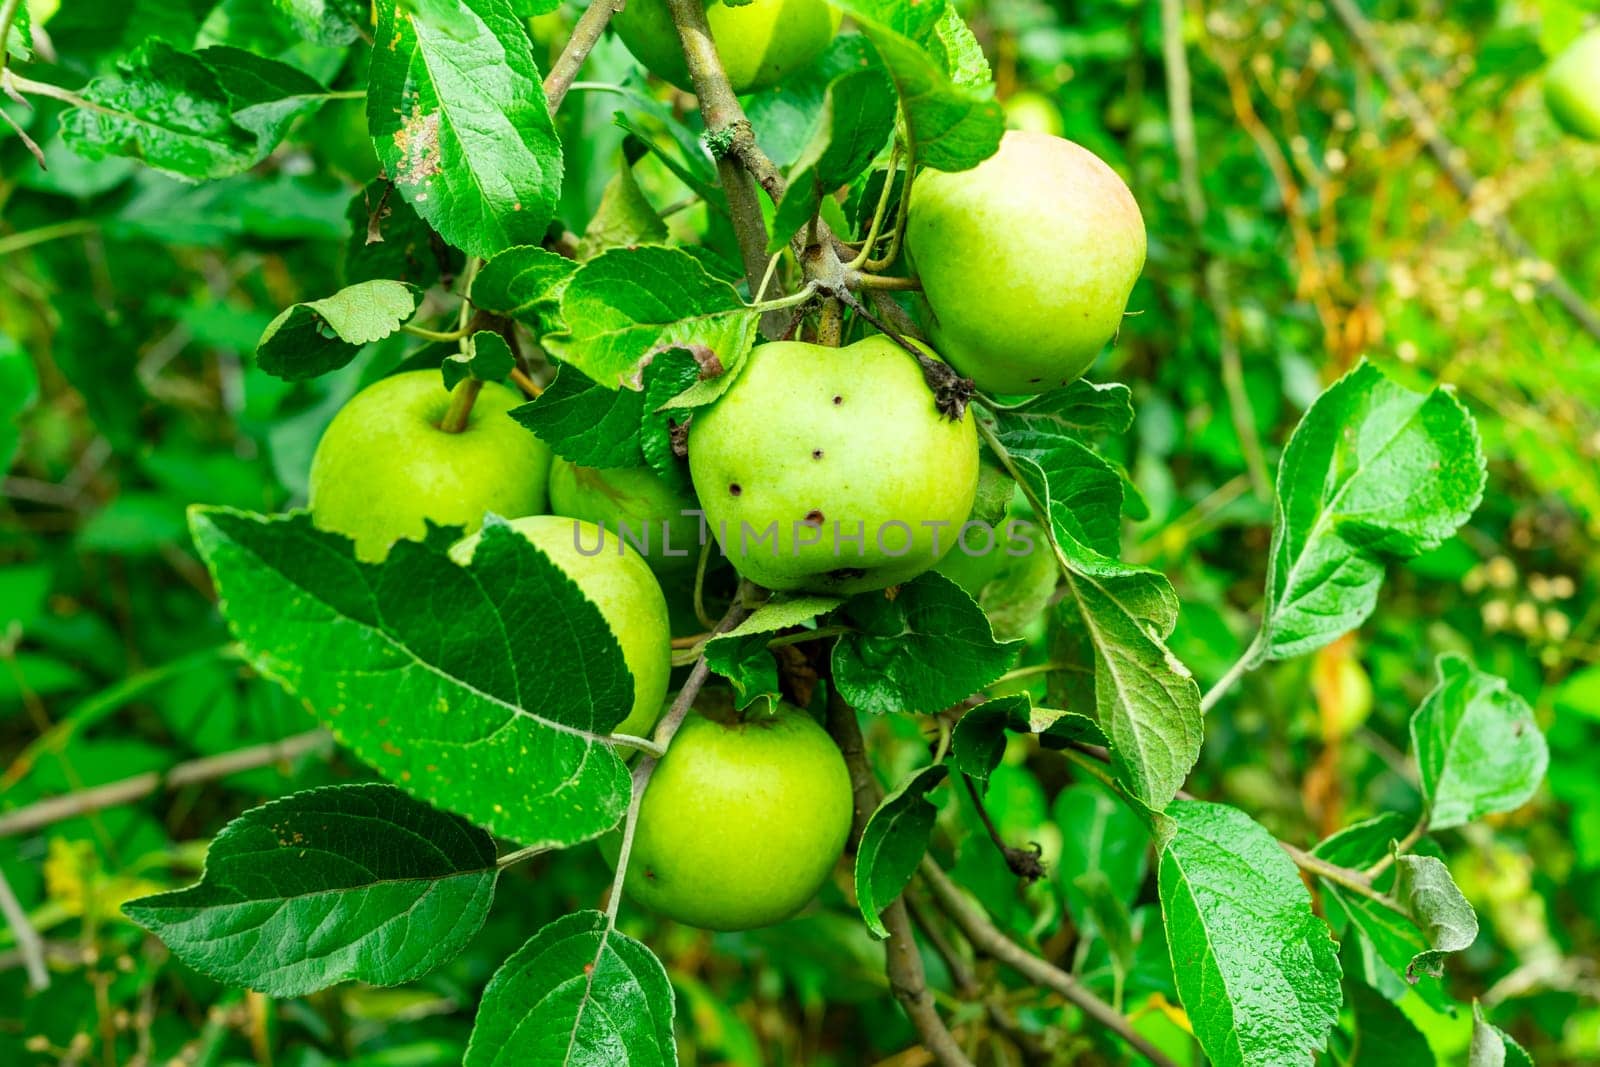 A branch of an apple tree with several green apples close-up.